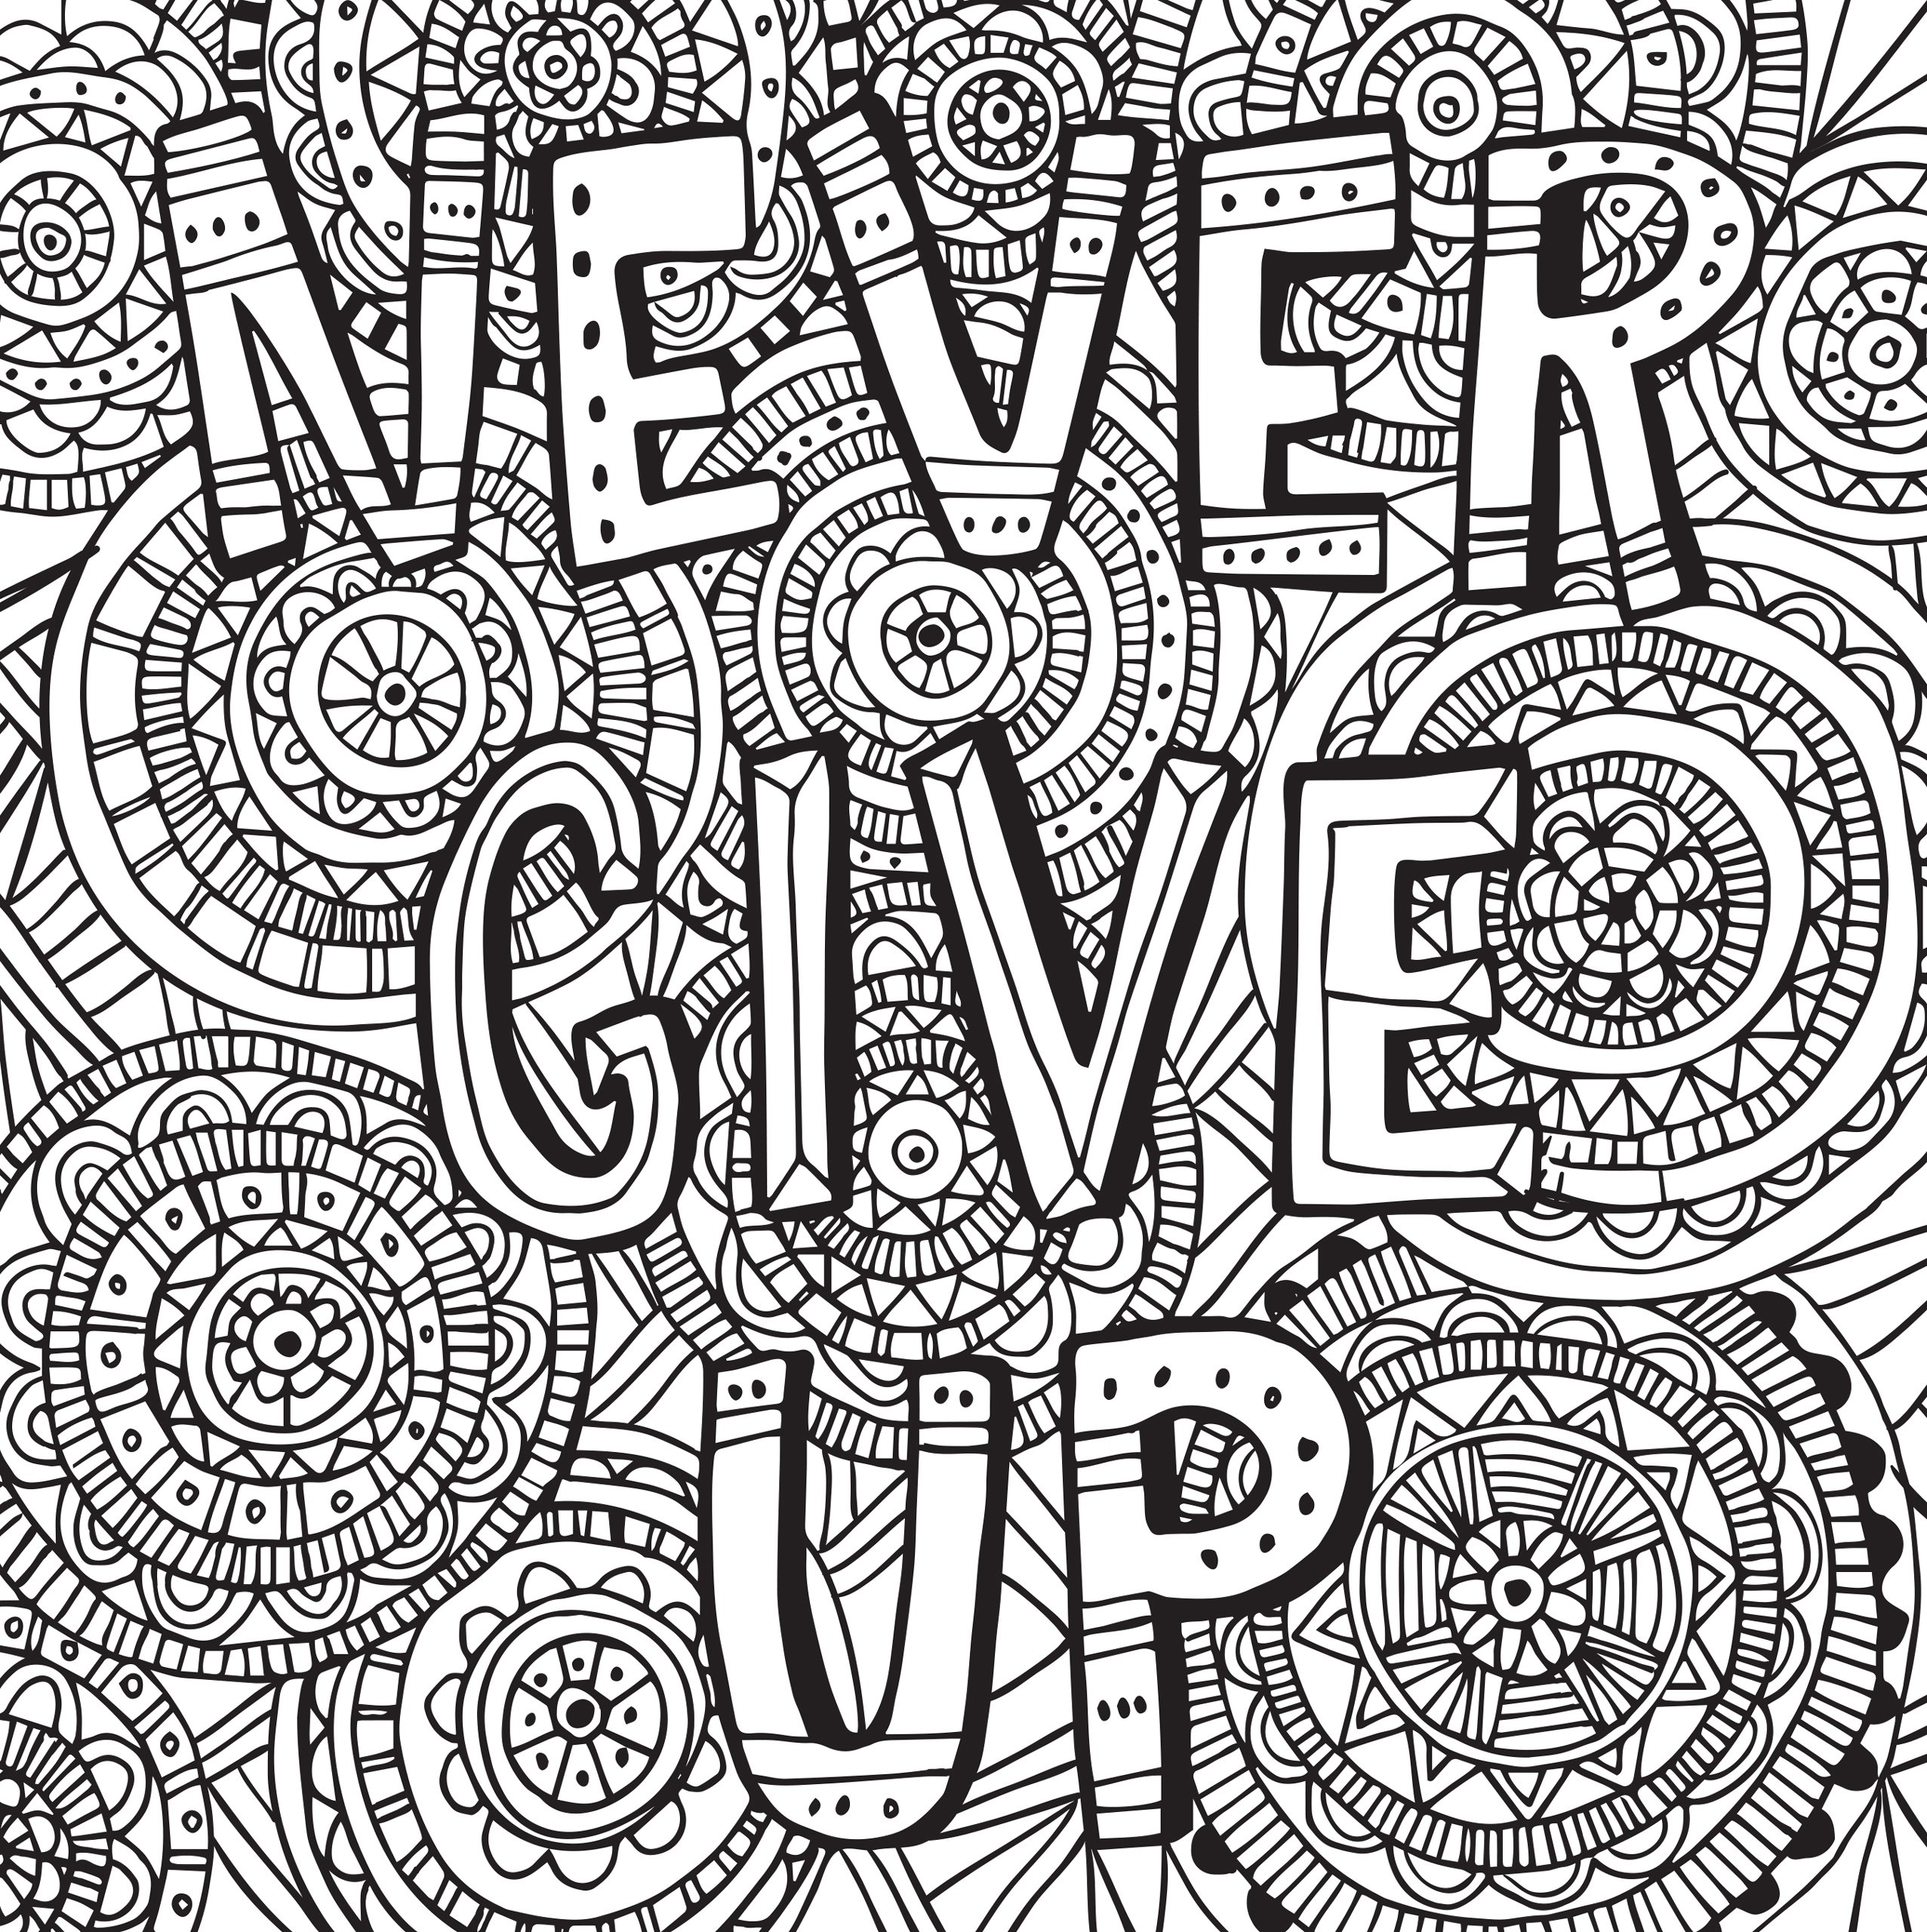 The Best Free Motivational Coloring Page Images Download - 2553*2560 - Png  Download - Free Transparent Background